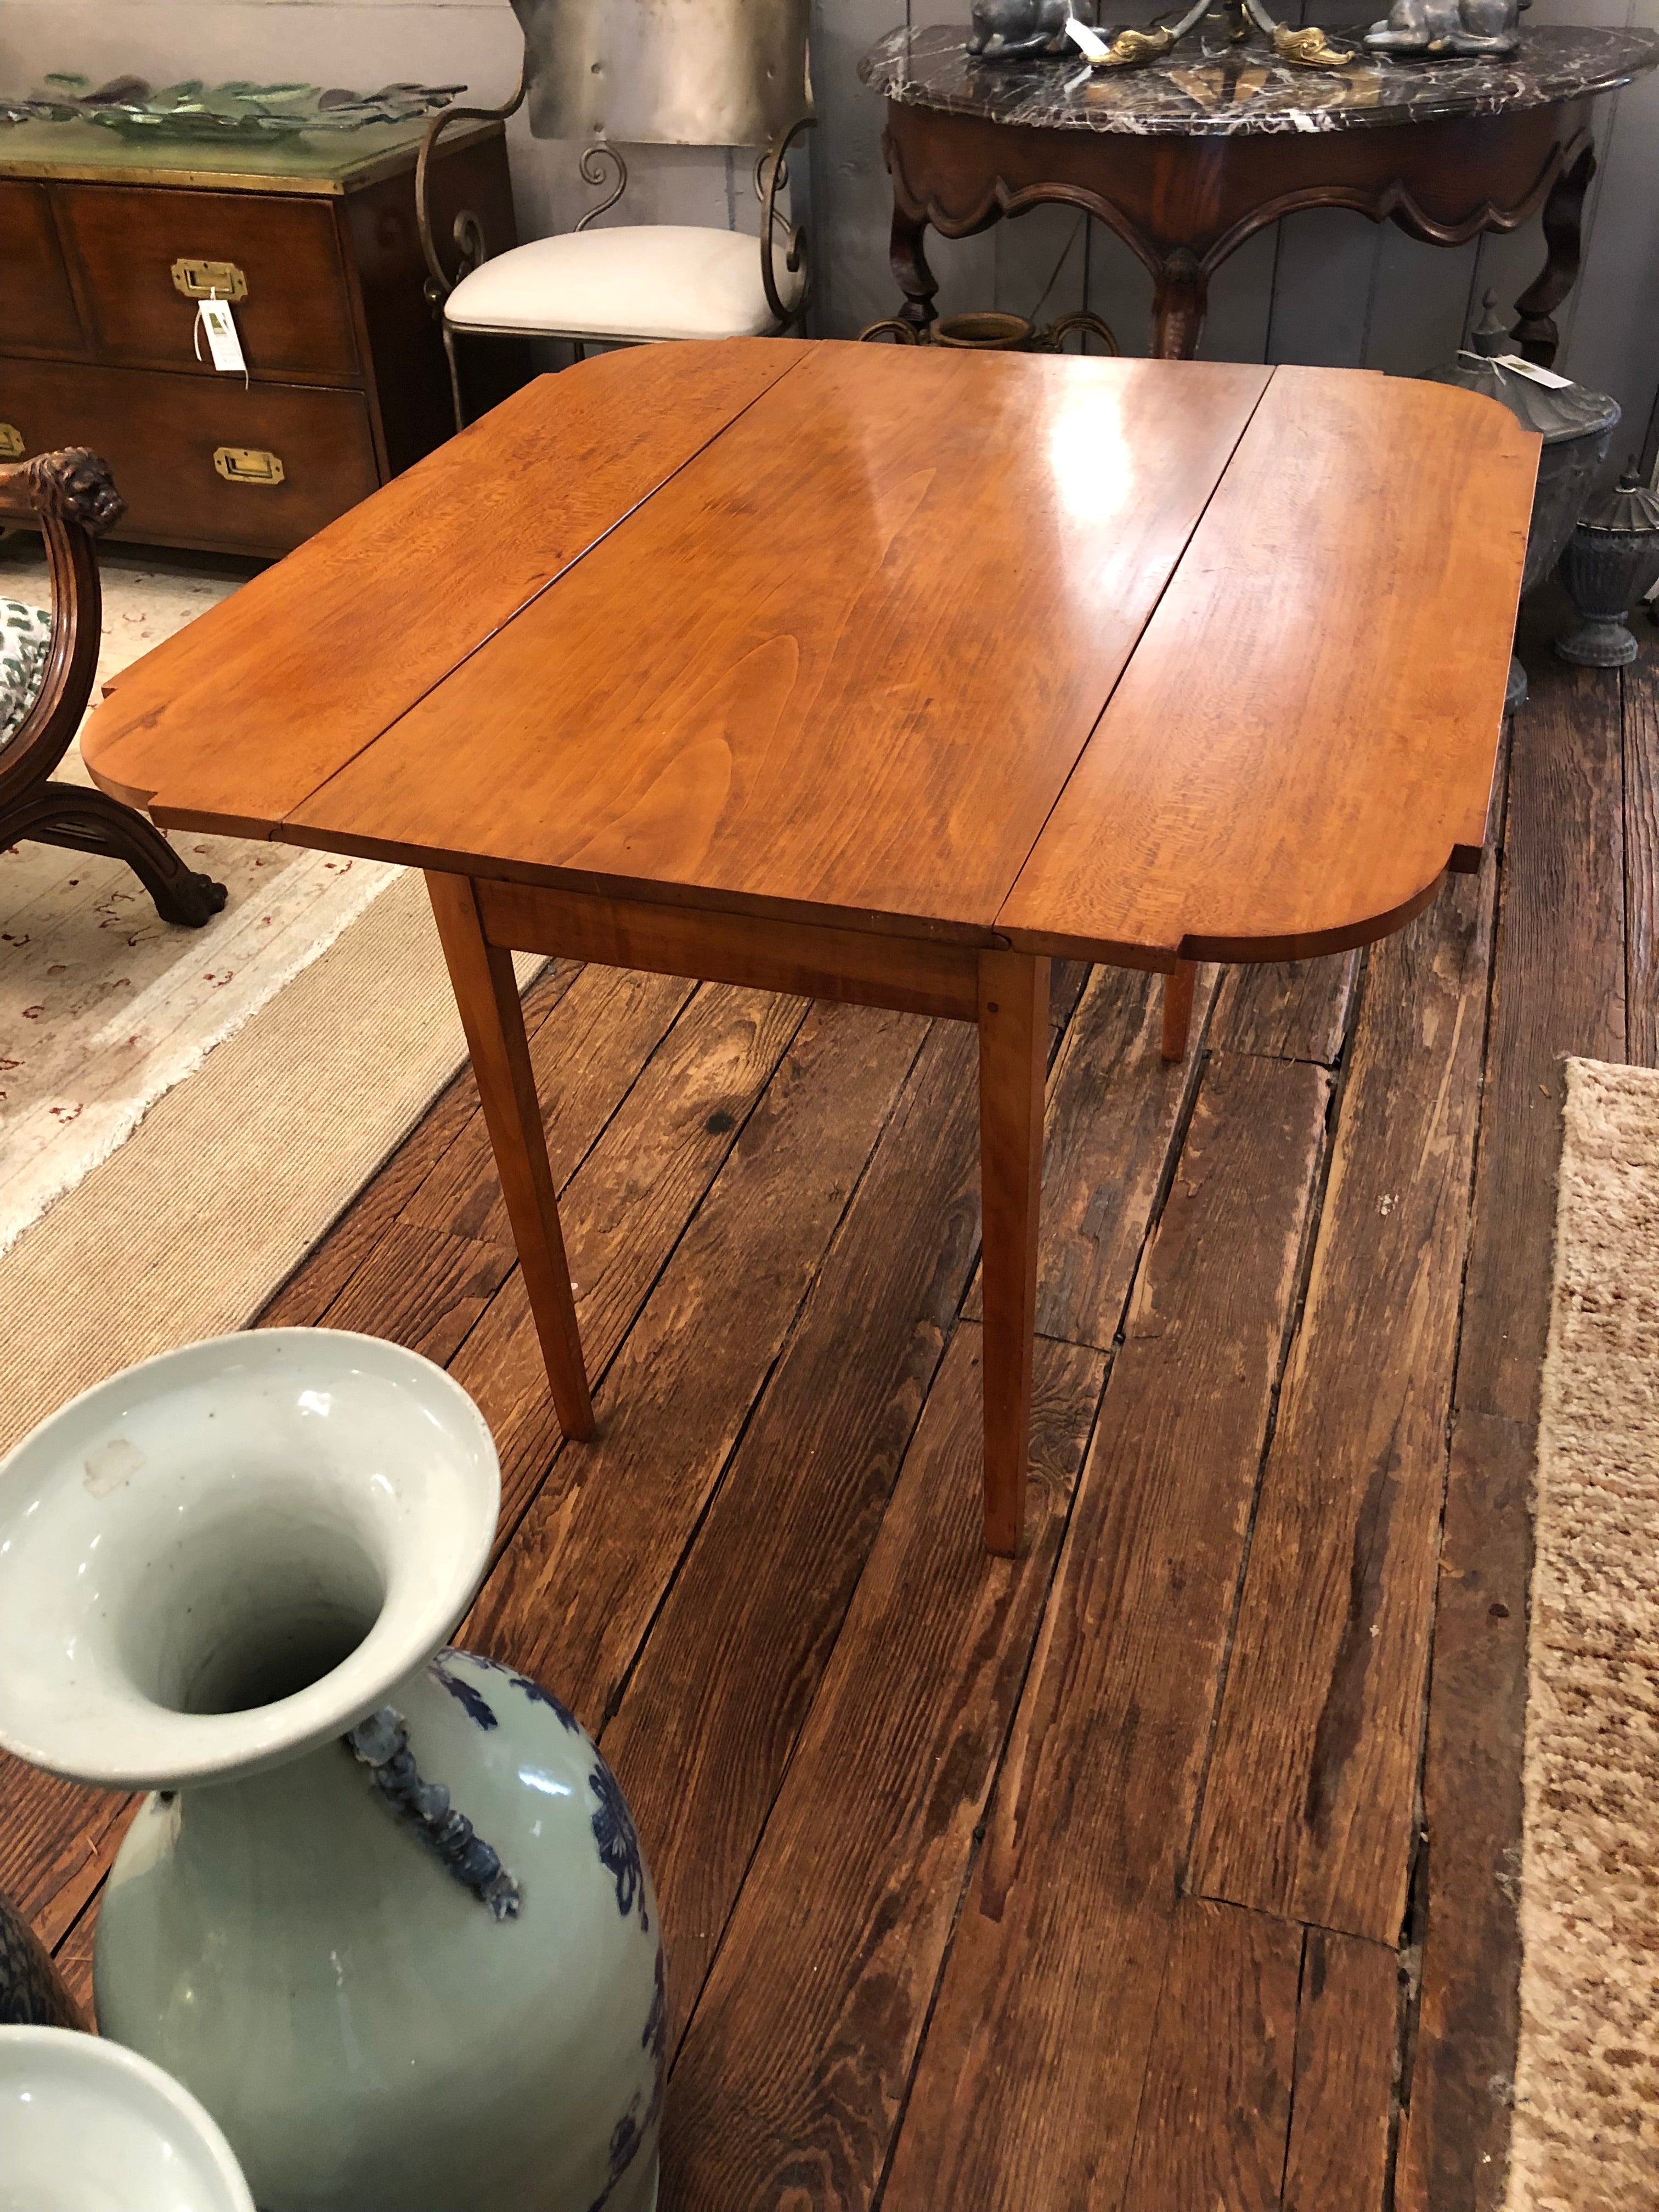 Classic American pine drop leaf table with warm slightly worn patina, having two leaves. Makes a narrow lovely console or side table, and also can be used as a small dining table when the leave are extended. Beautifully made.
Each leaf is 9